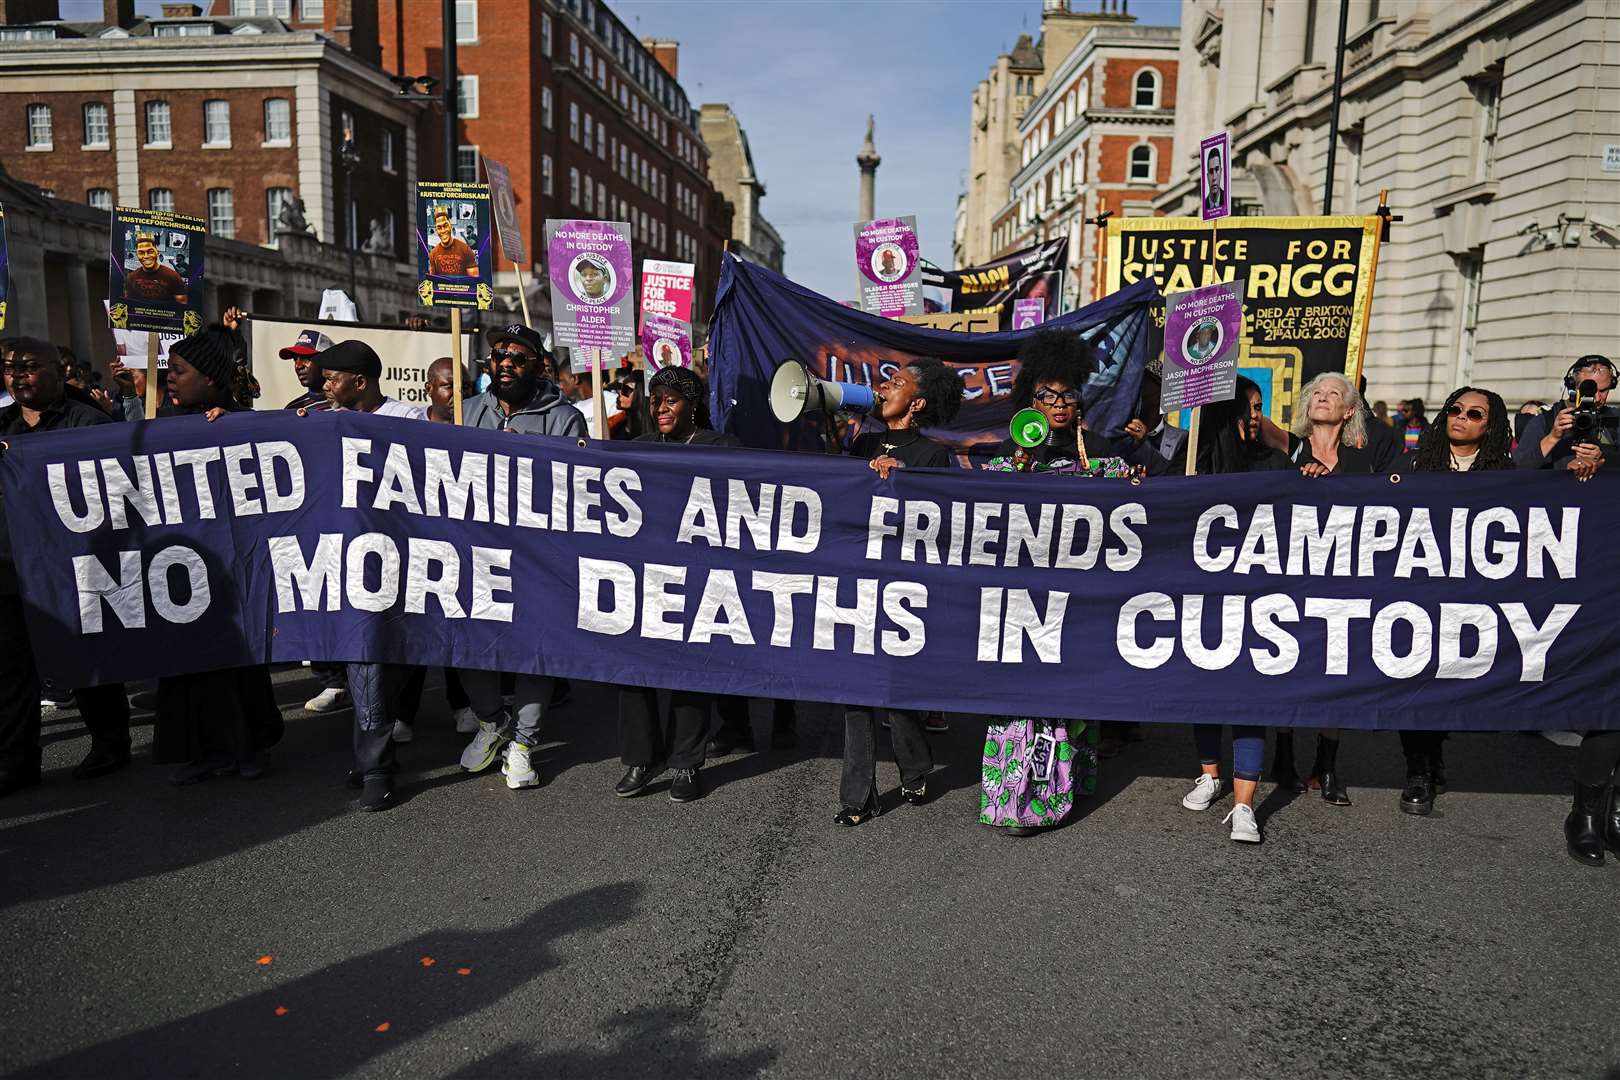 The protesters march behind a banner in central London (Aaron Chown/PA)